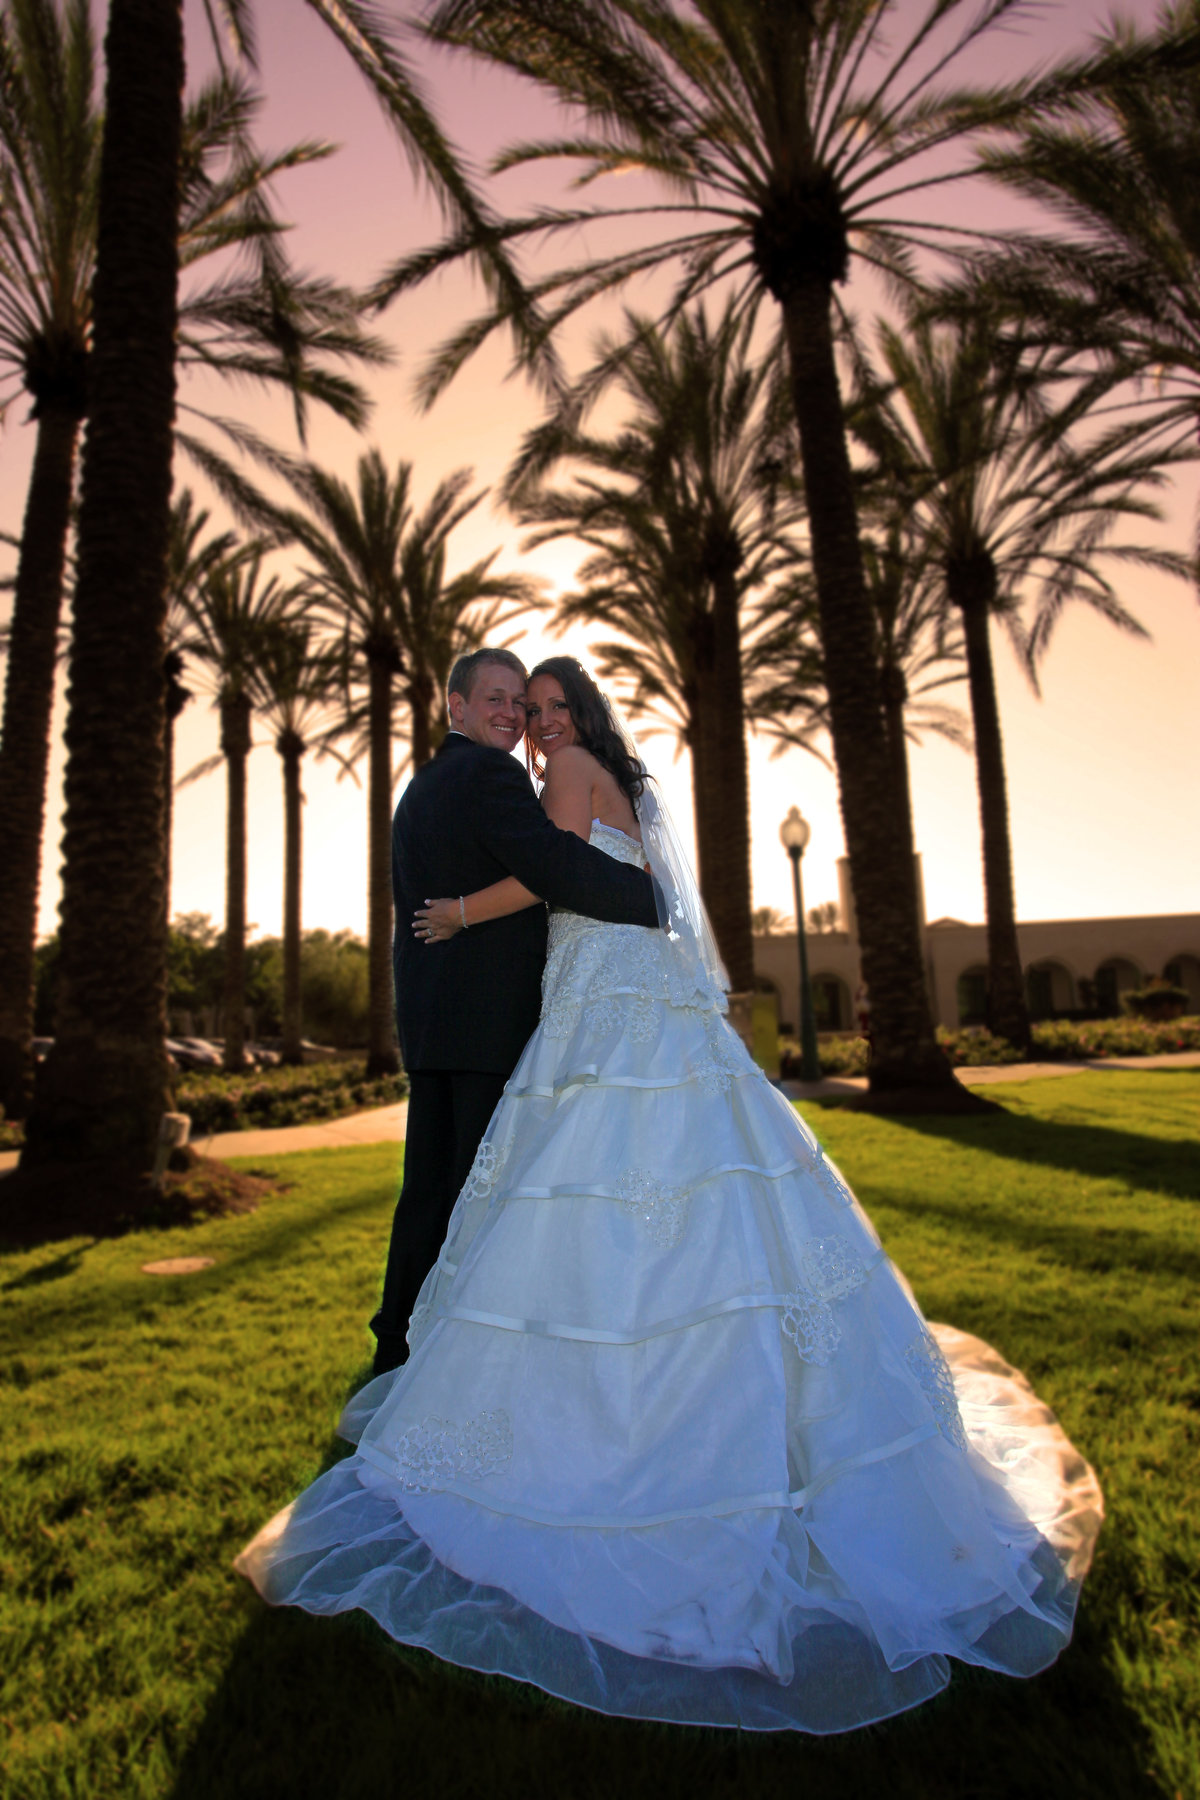 Kassel Photography offers 16 years experience in wedding and family photography.